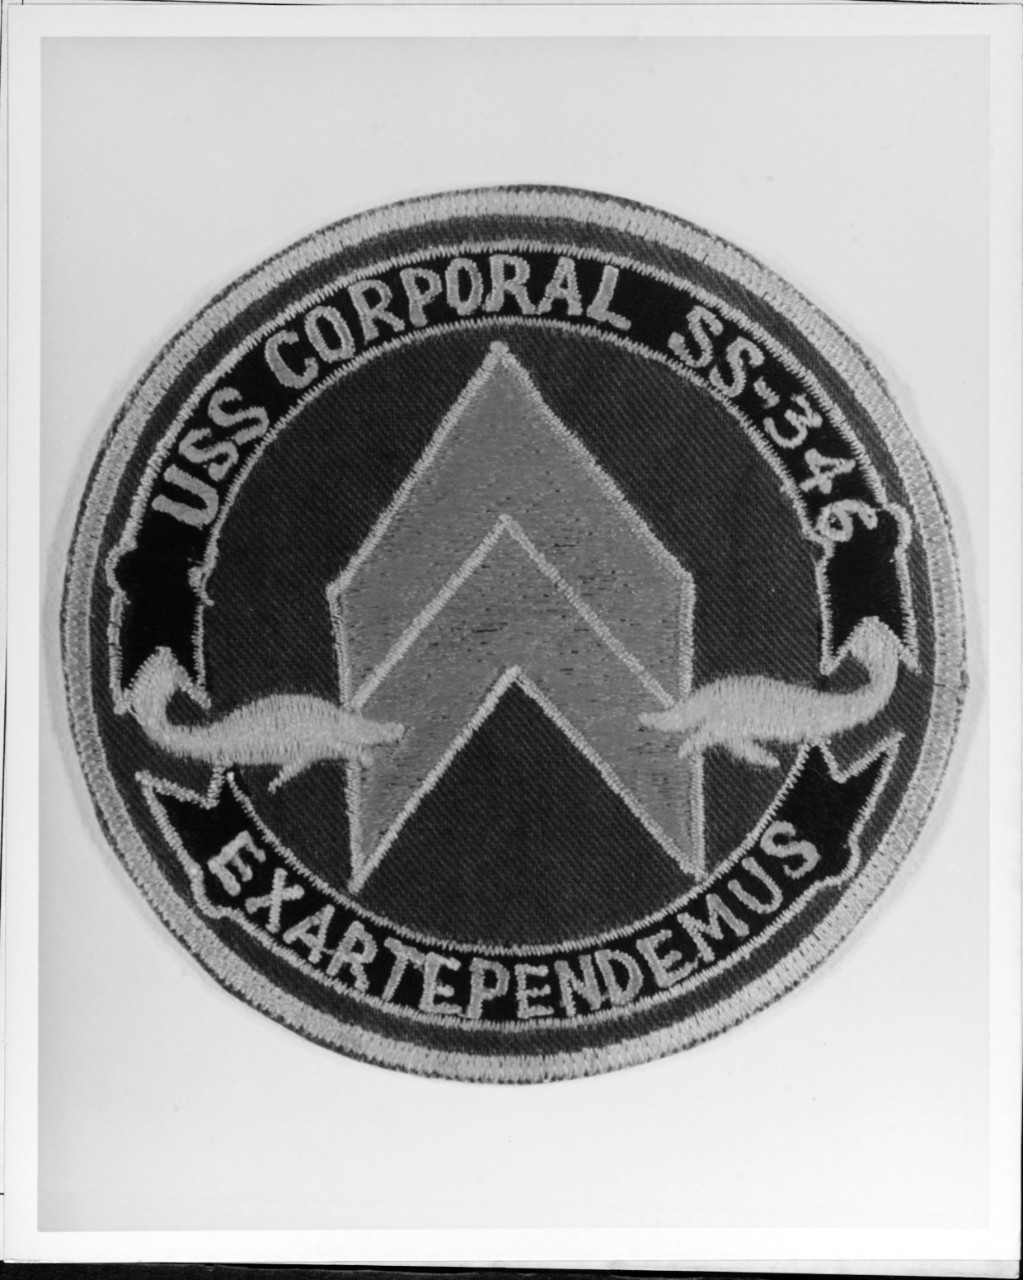 Insignia: USS CORPORAL (SS-346)